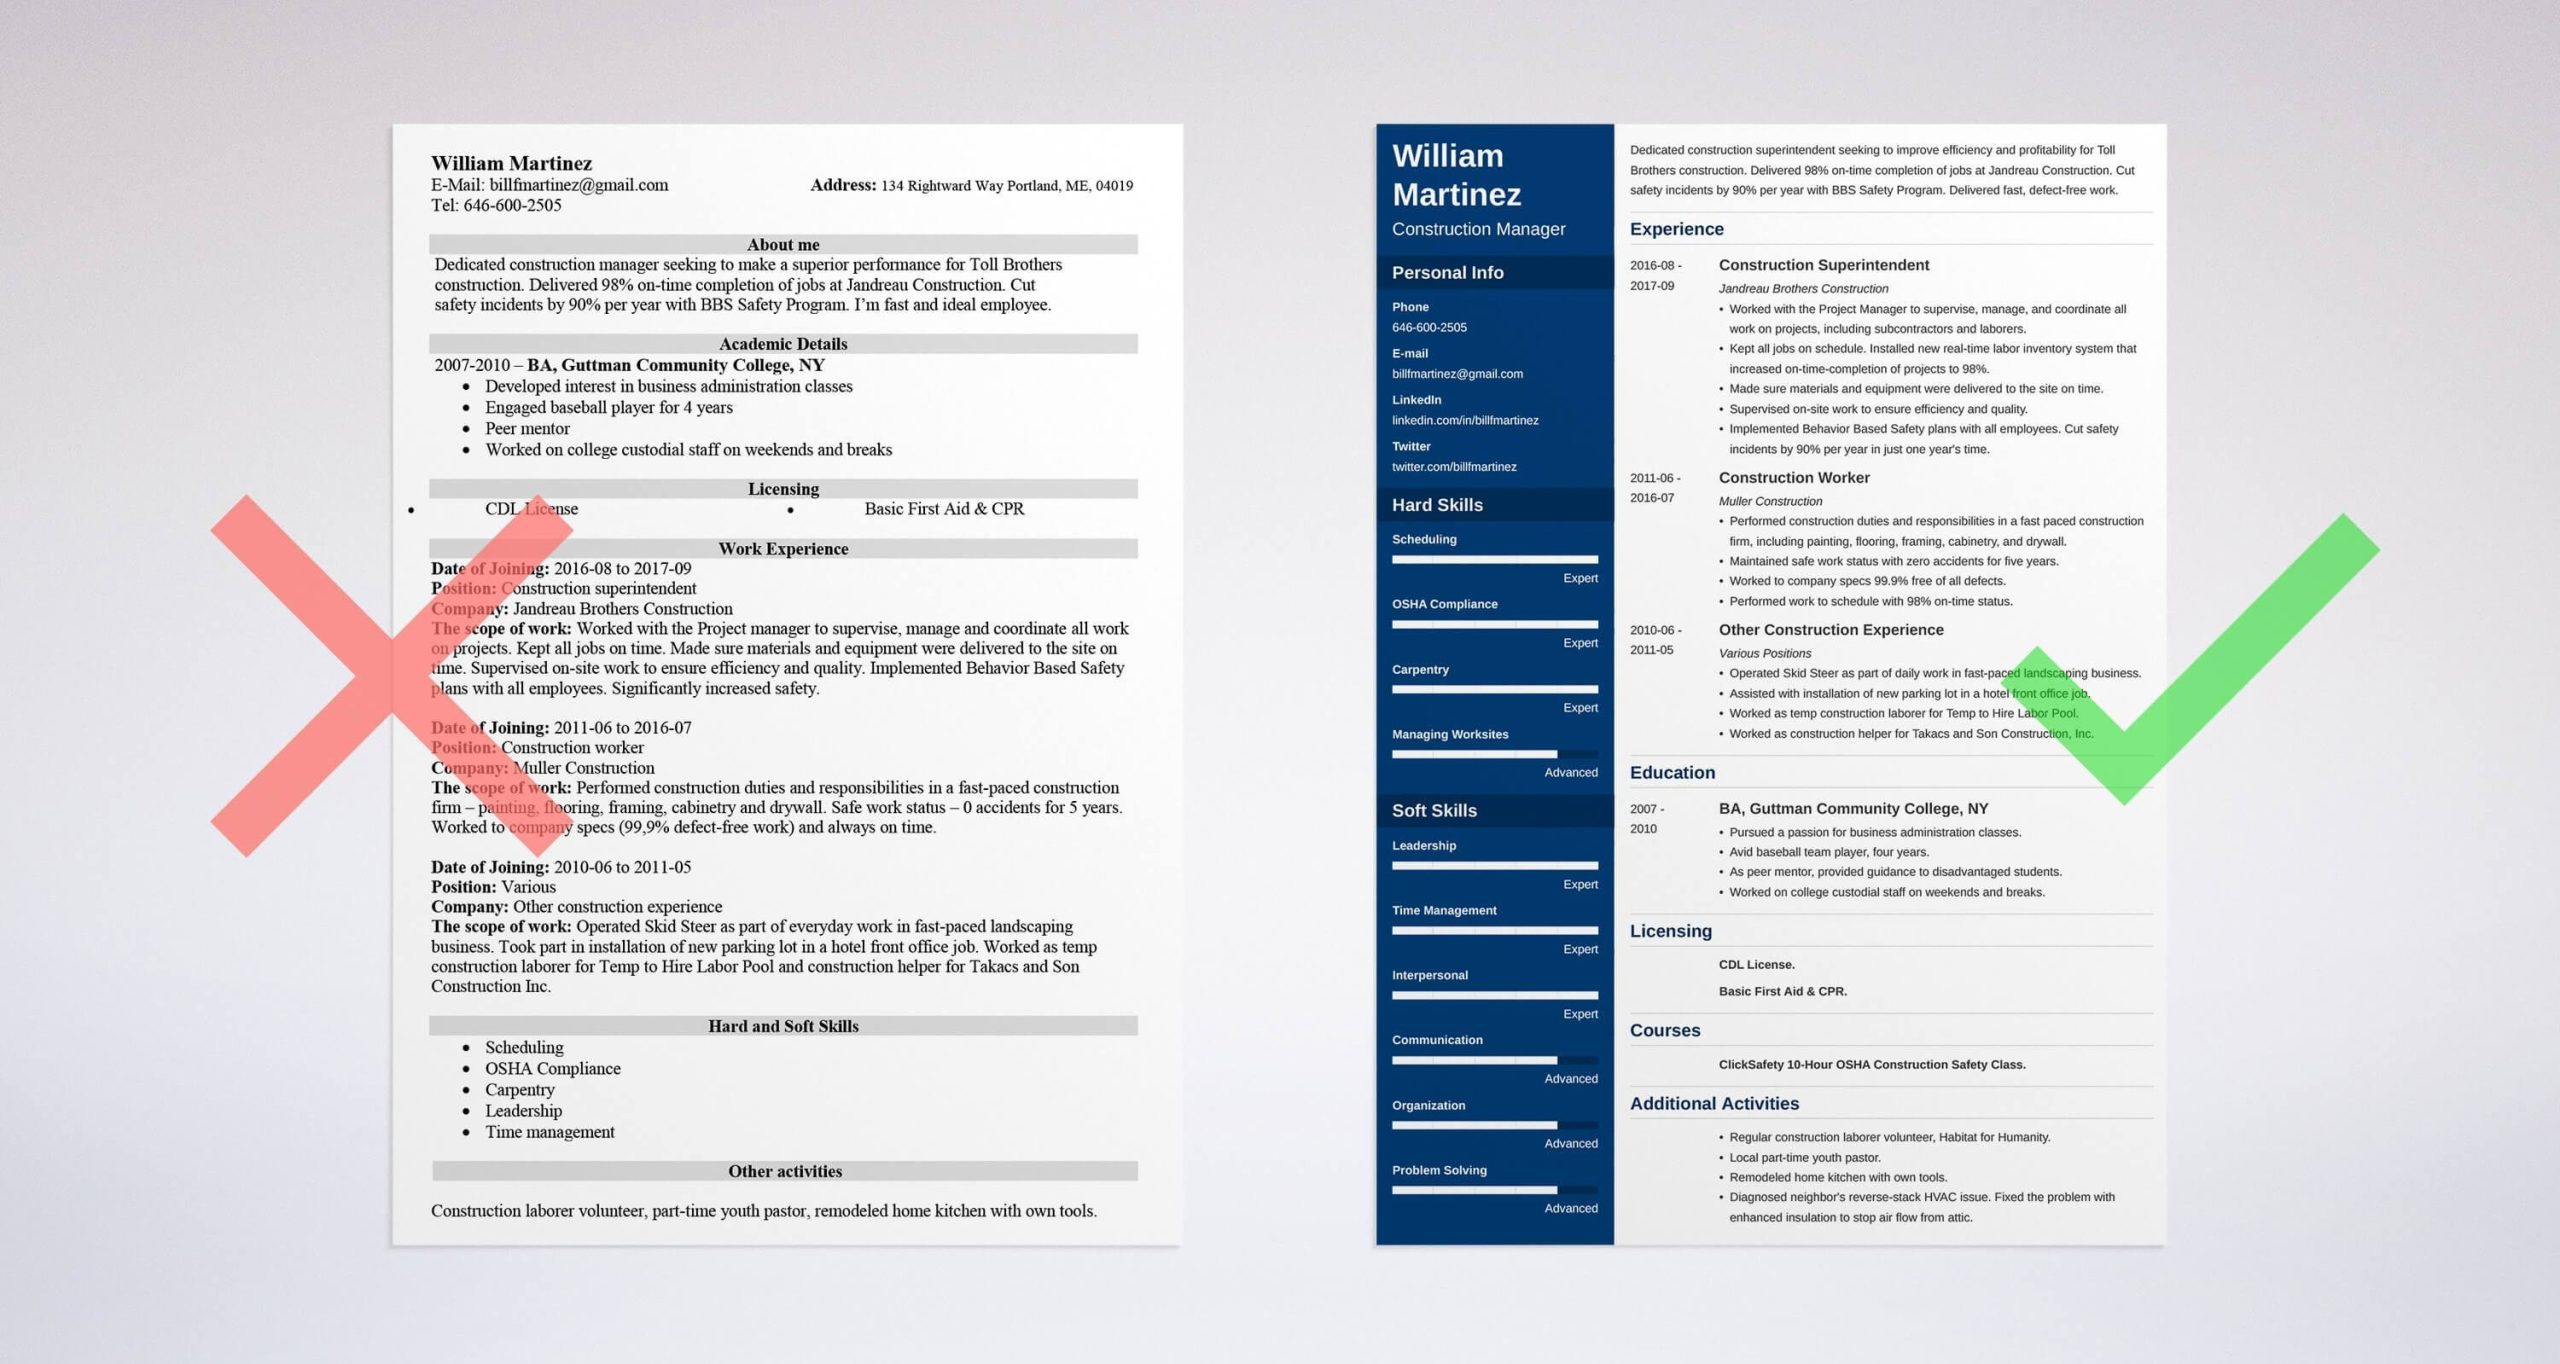 Resume Samples for Construction Job Descriptions Construction Worker Resume Examples (template & Skills)